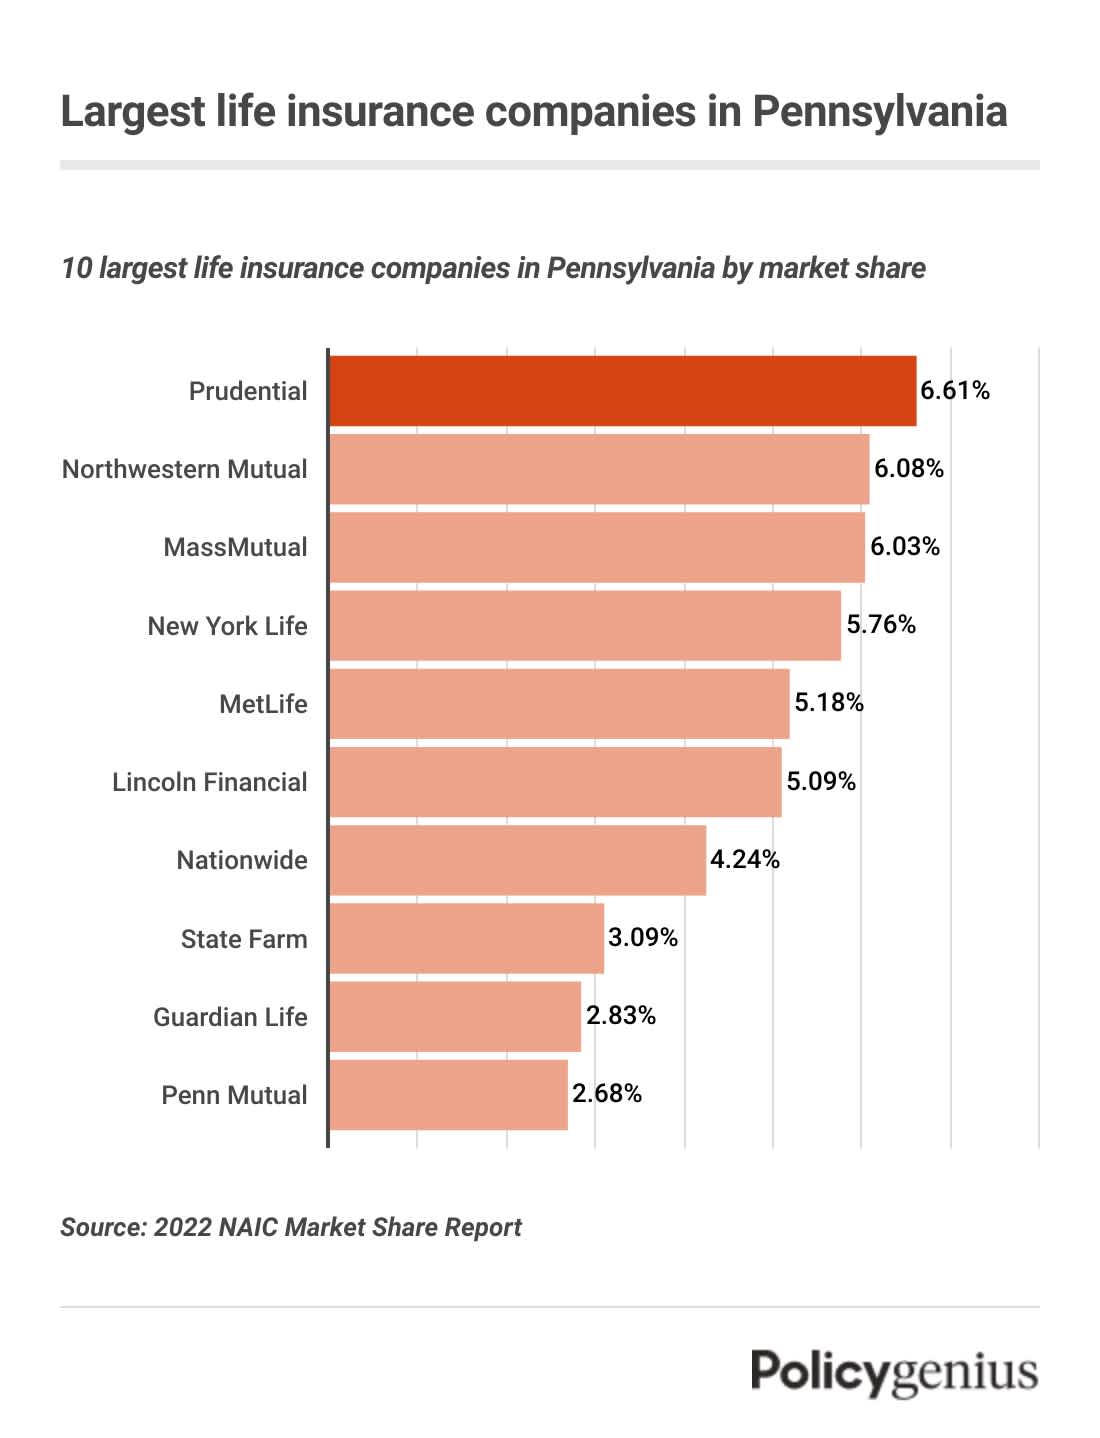 A bar graph showing the largest life insurance companies by market share in Pennsylvania.